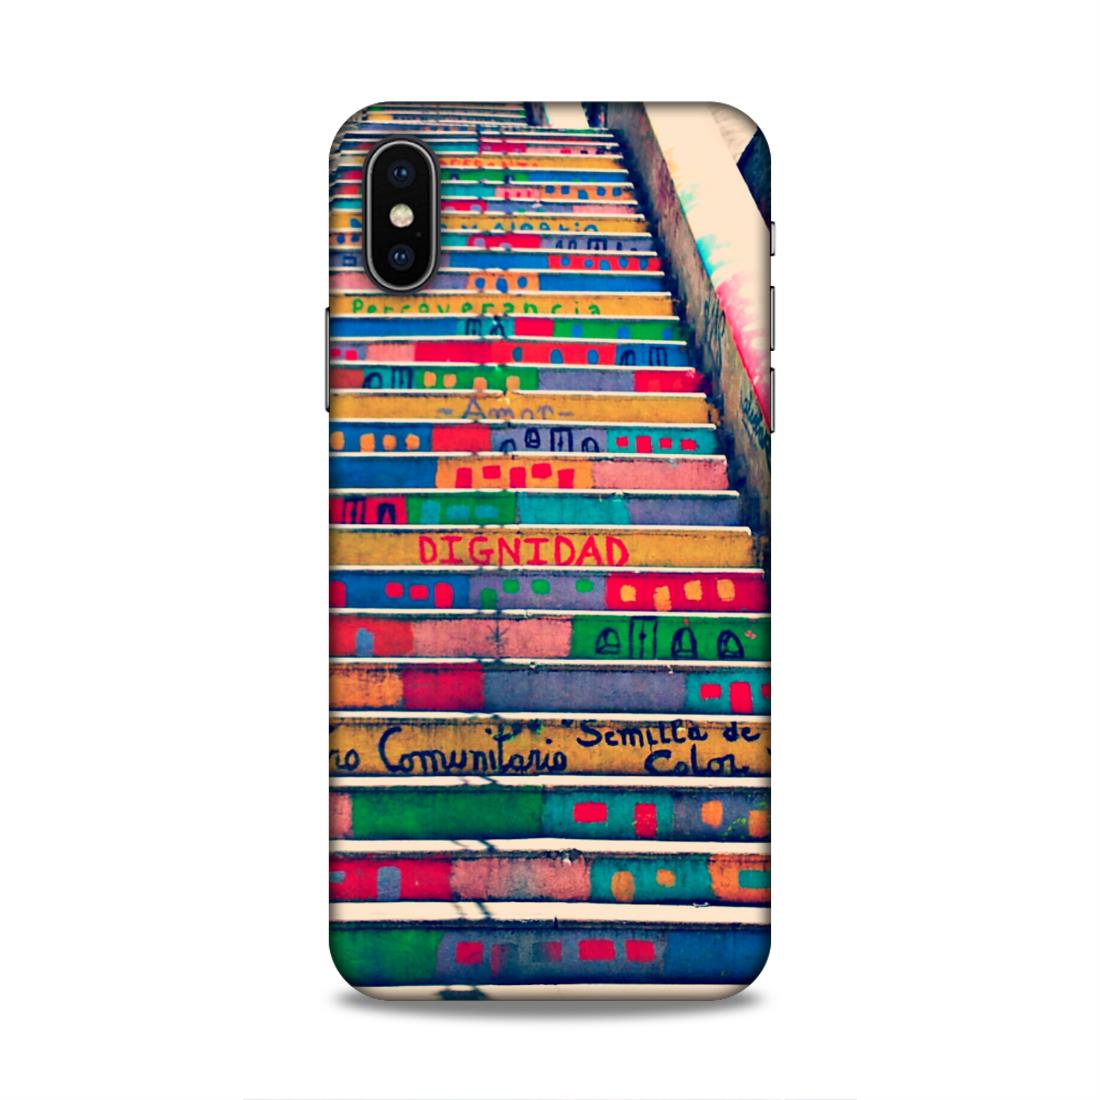 Stairs Hard Back Case For Apple iPhone X/XS